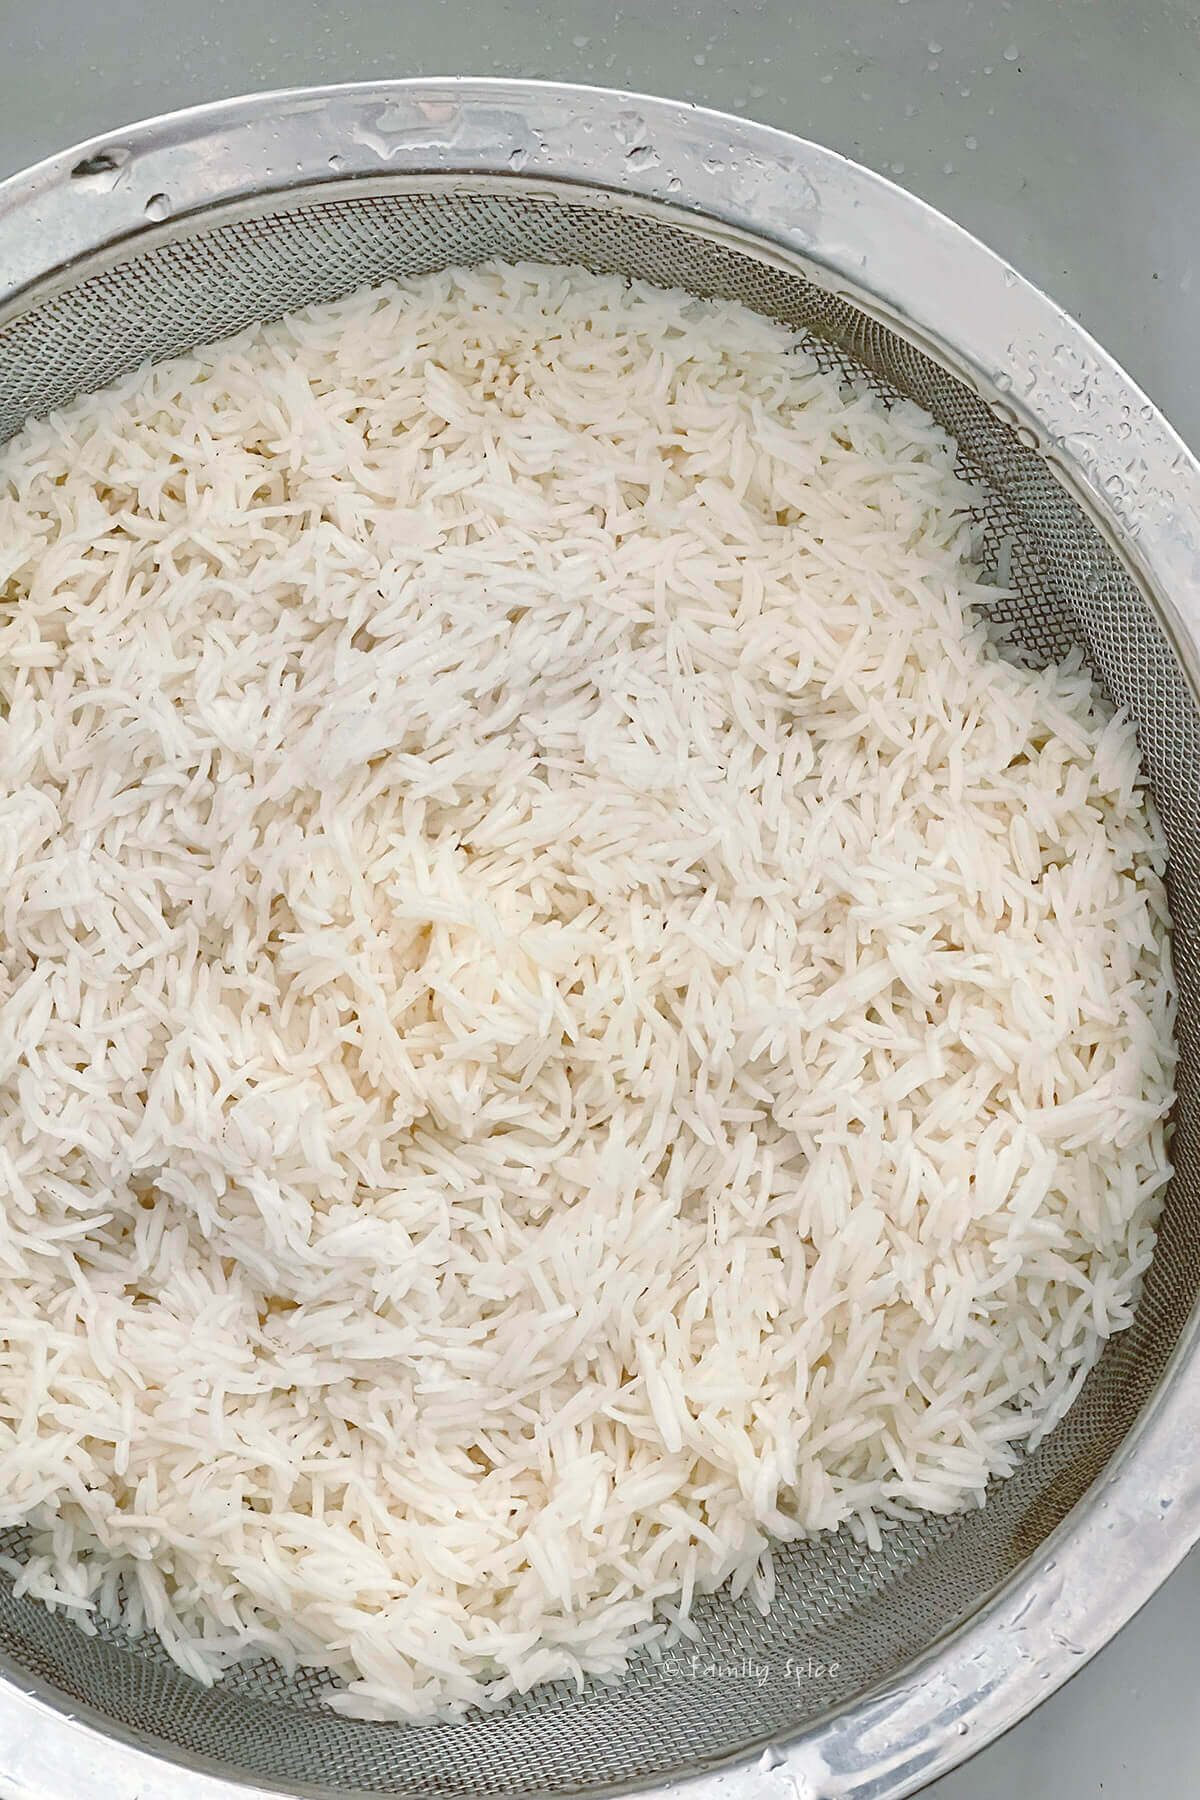 White basmati rice parboiled and drained in a mesh strainer